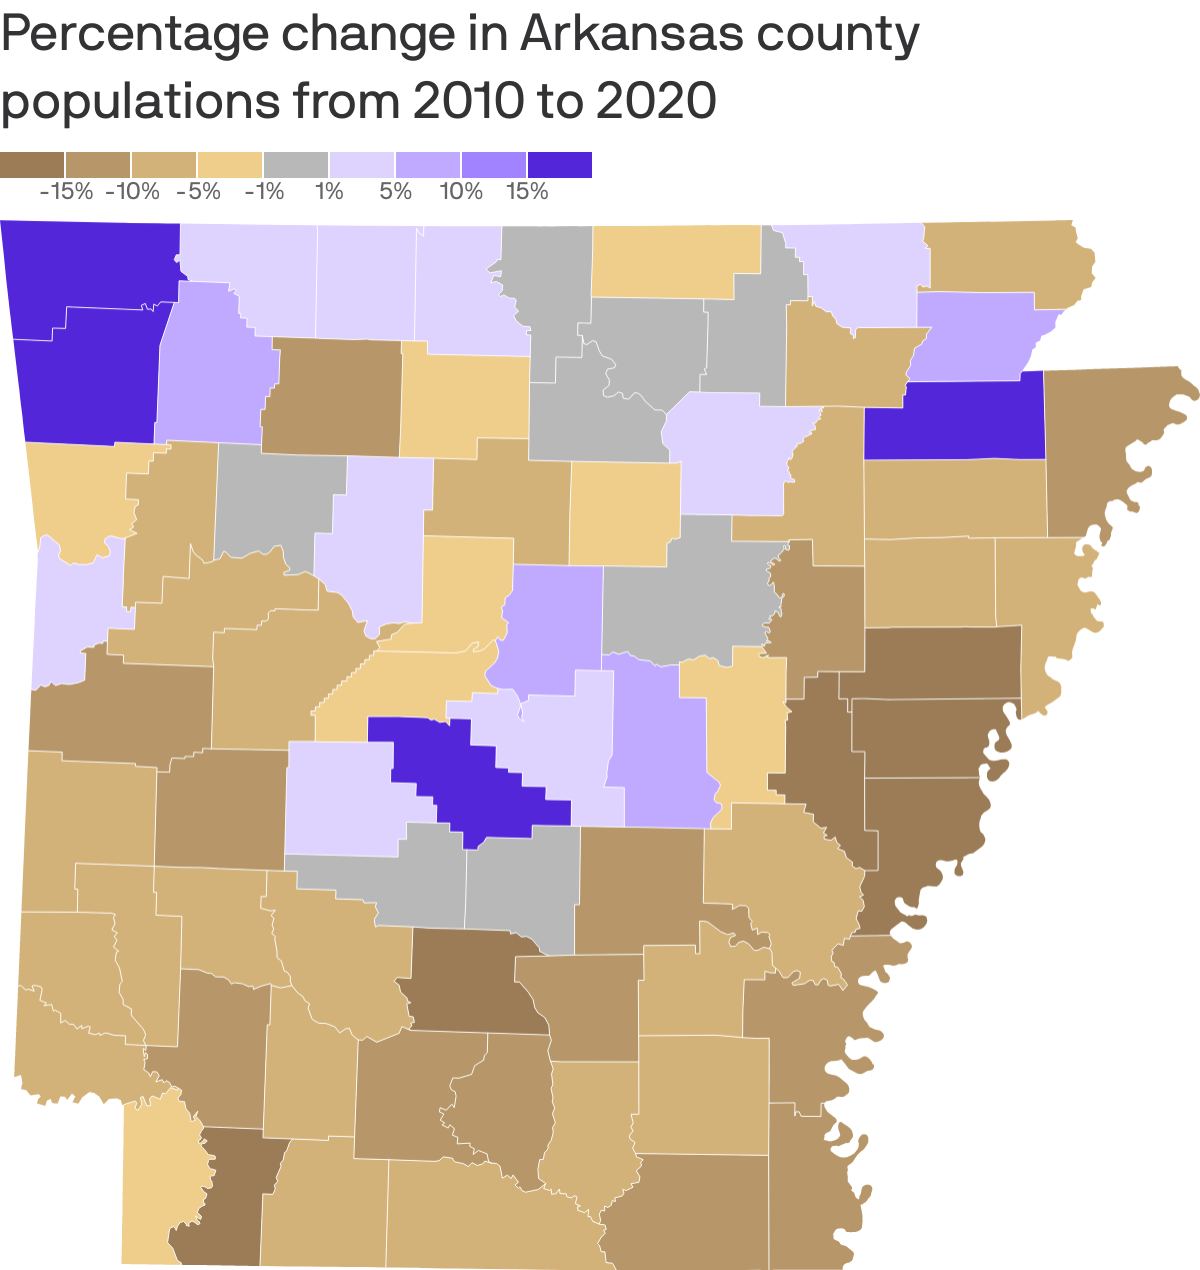 Percentage change in Arkansas county populations from 2010 to 2020